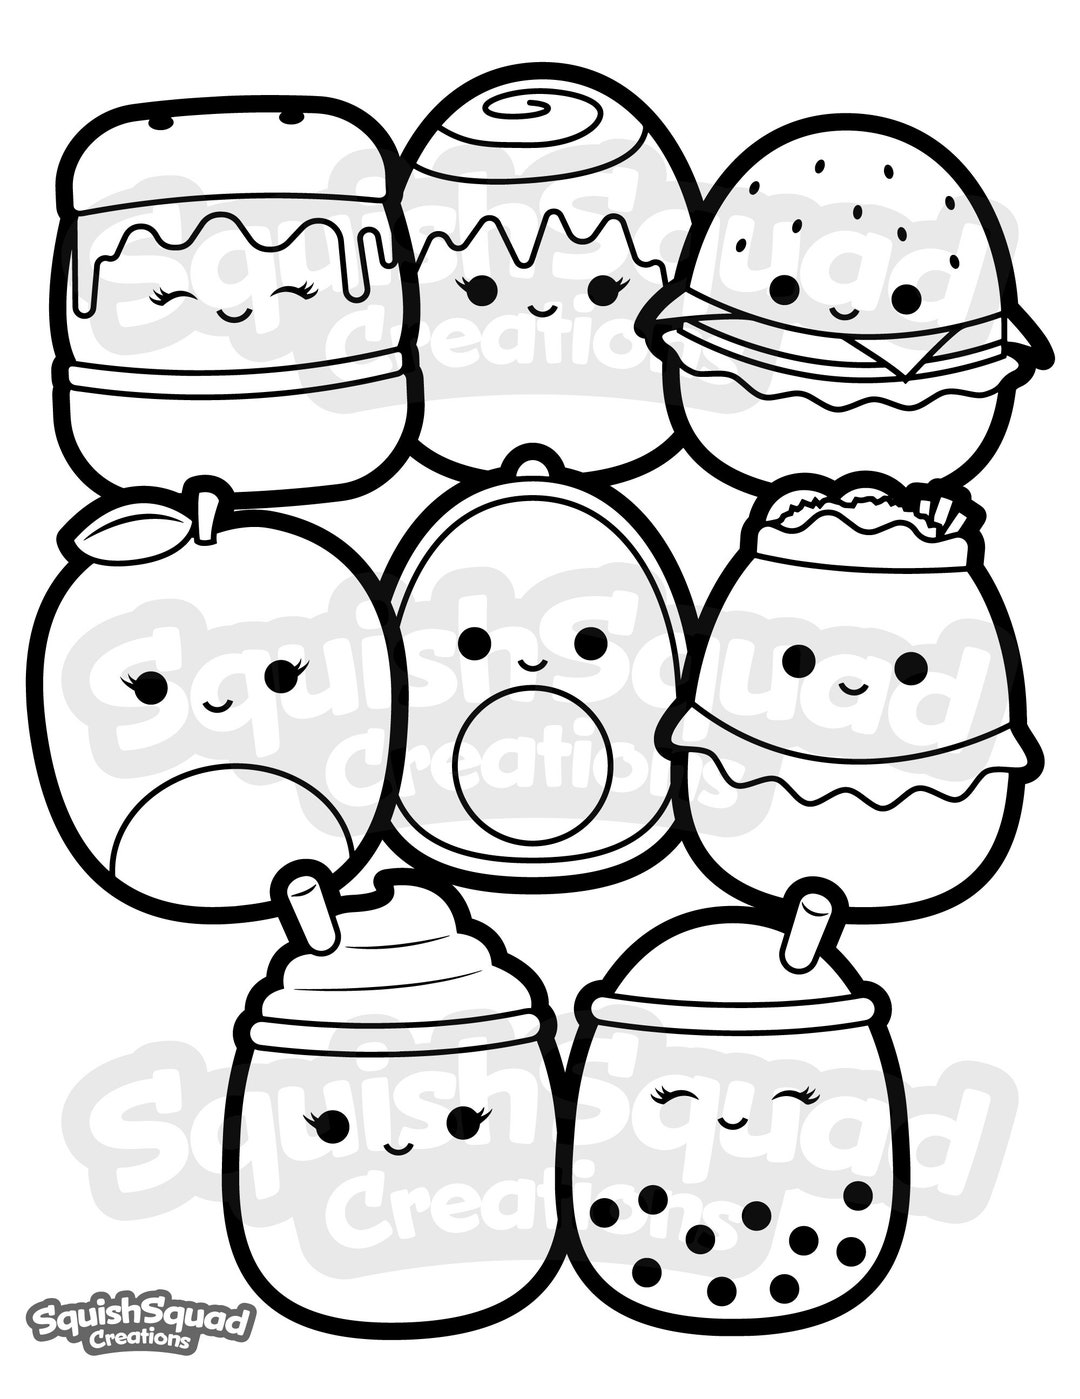 squishmallow-coloring-page-printable-squishmallow-coloring-page-squishmallow-downloadable